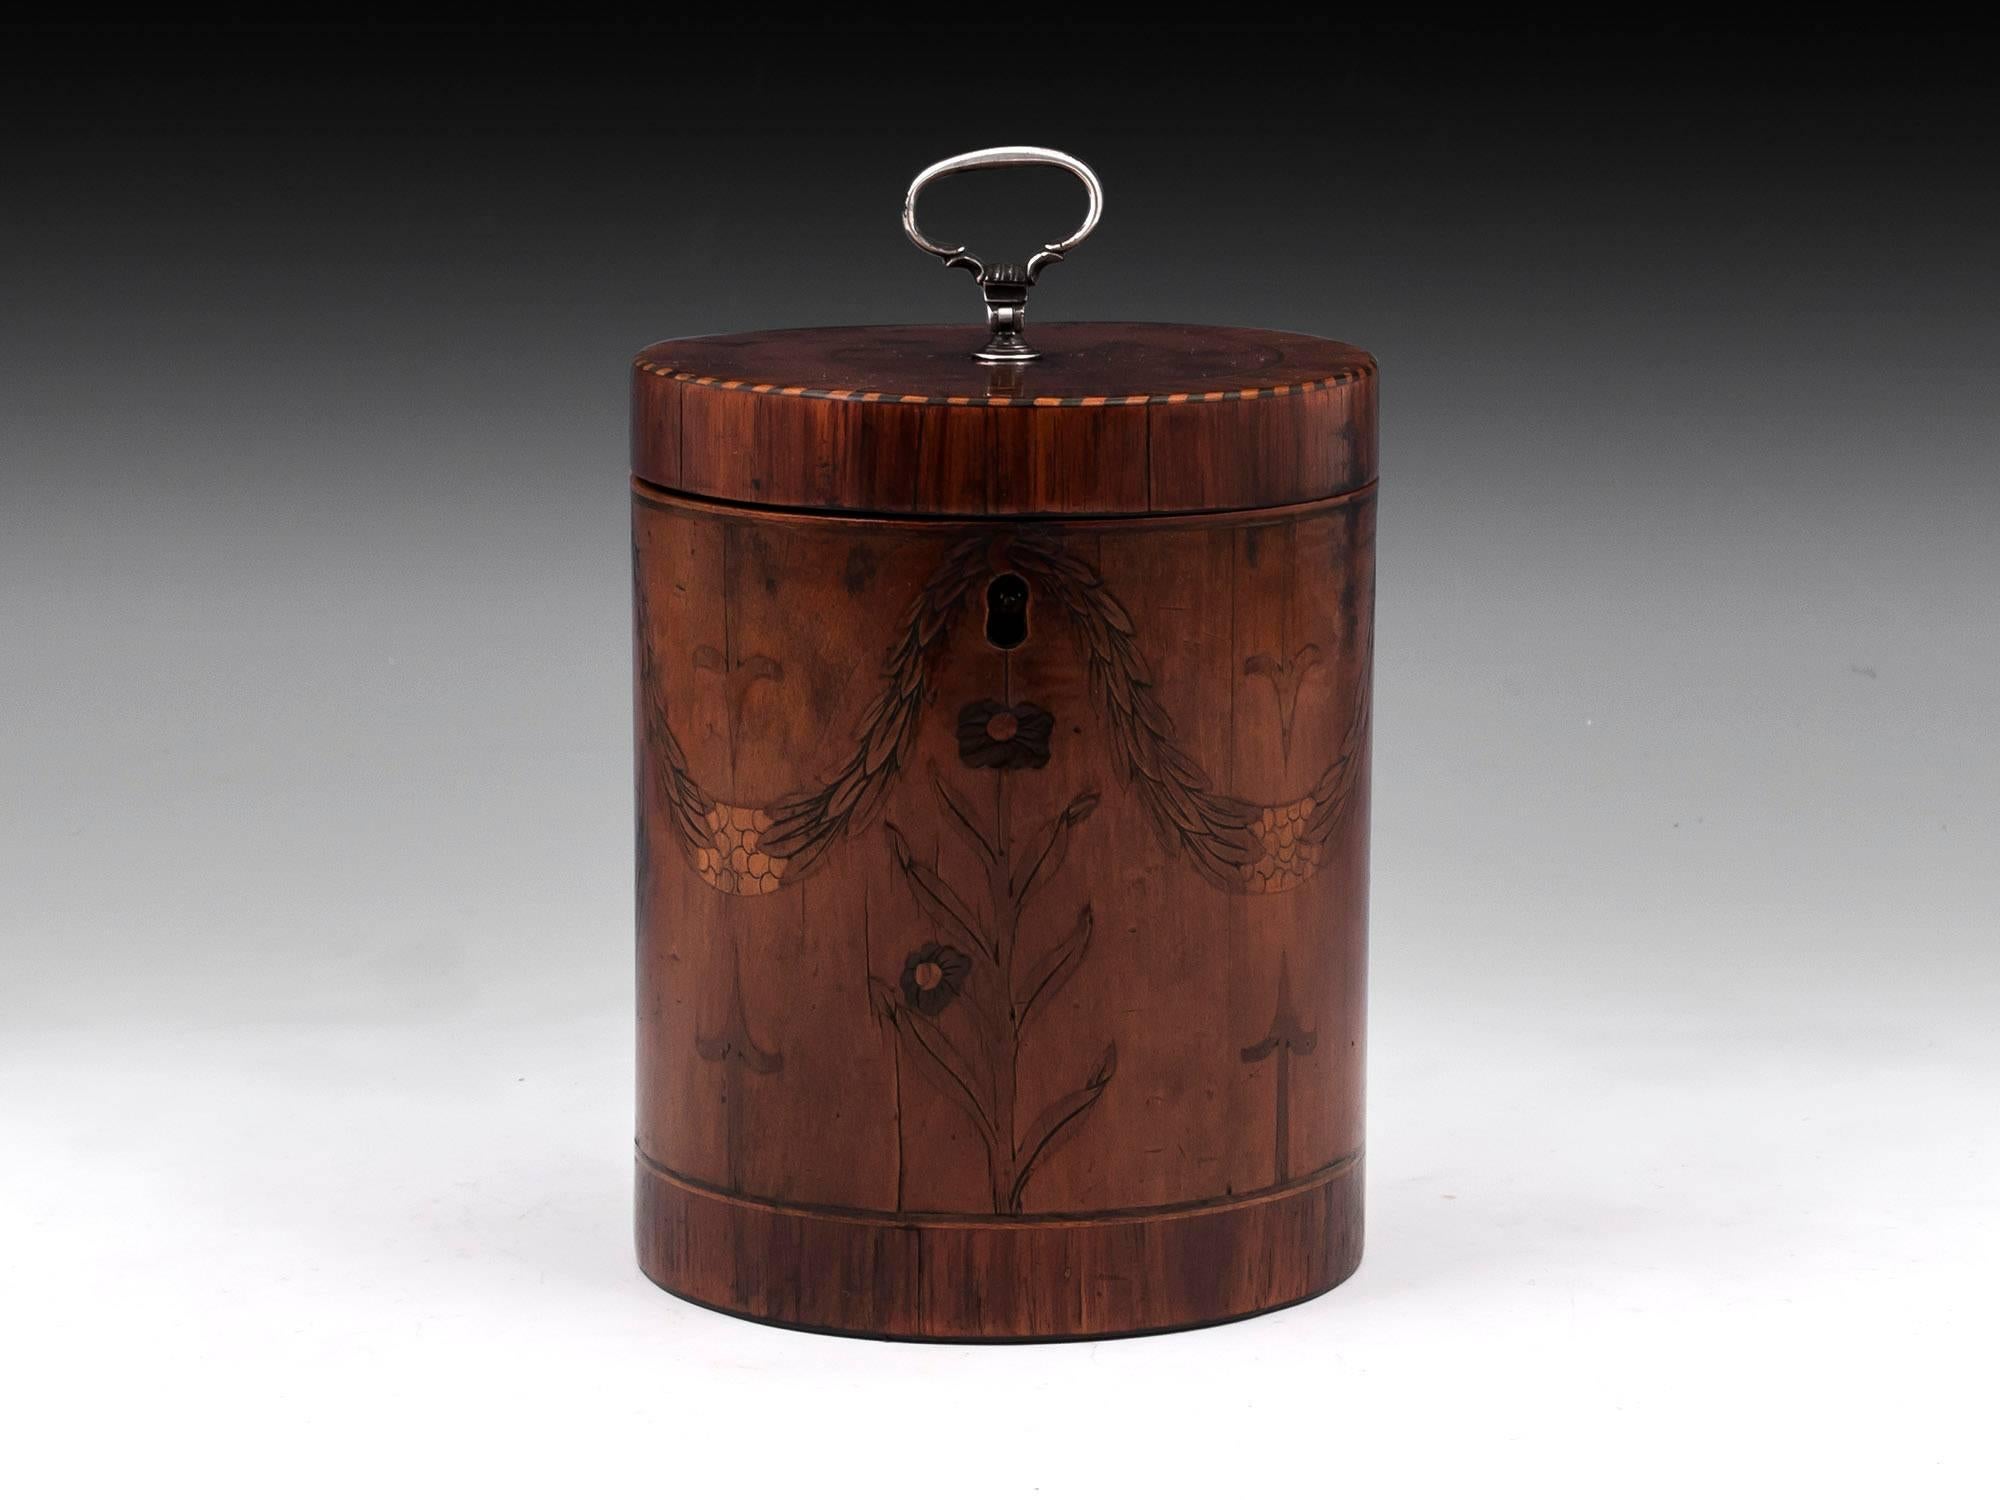 Rare cylindrical satinwood tea caddy, beautifully inlaid with engraved laurel swags and flowers with a chequered edging of boxwood and ebony. The top and bottom of the tea caddy have tulipwood crossbanding and boxwood and ebony stringing. Contains a